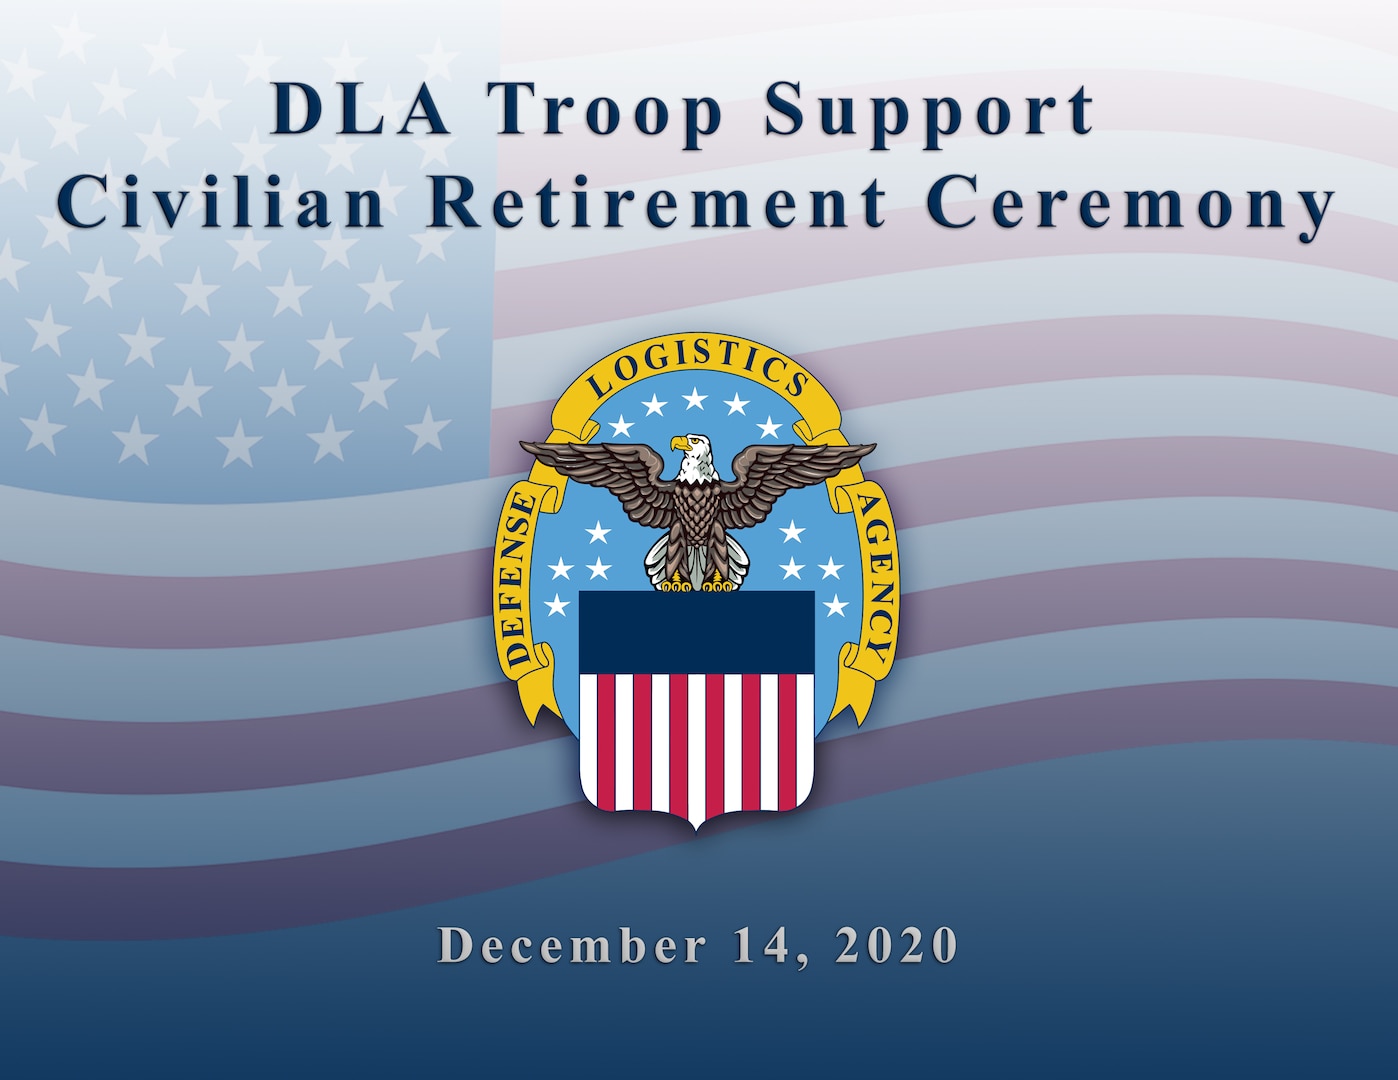 A graphic announcing the Defense Logistics Agency Troop Support civilian retirement ceremony.